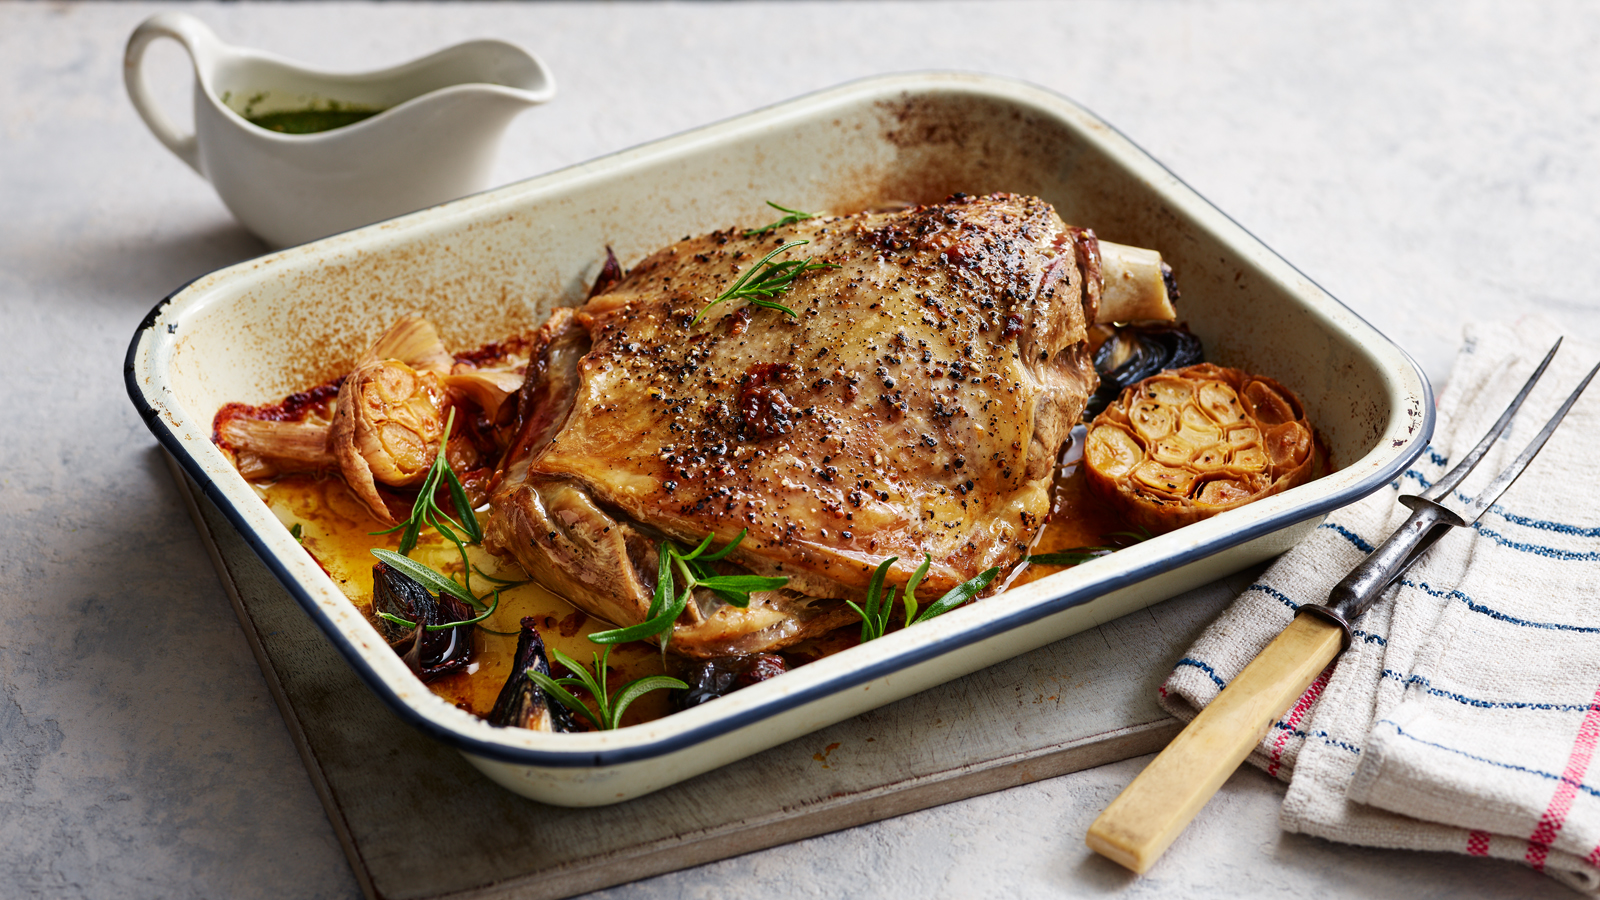 https://food-images.files.bbci.co.uk/food/recipes/slow_roasted_lamb_with_73428_16x9.jpg